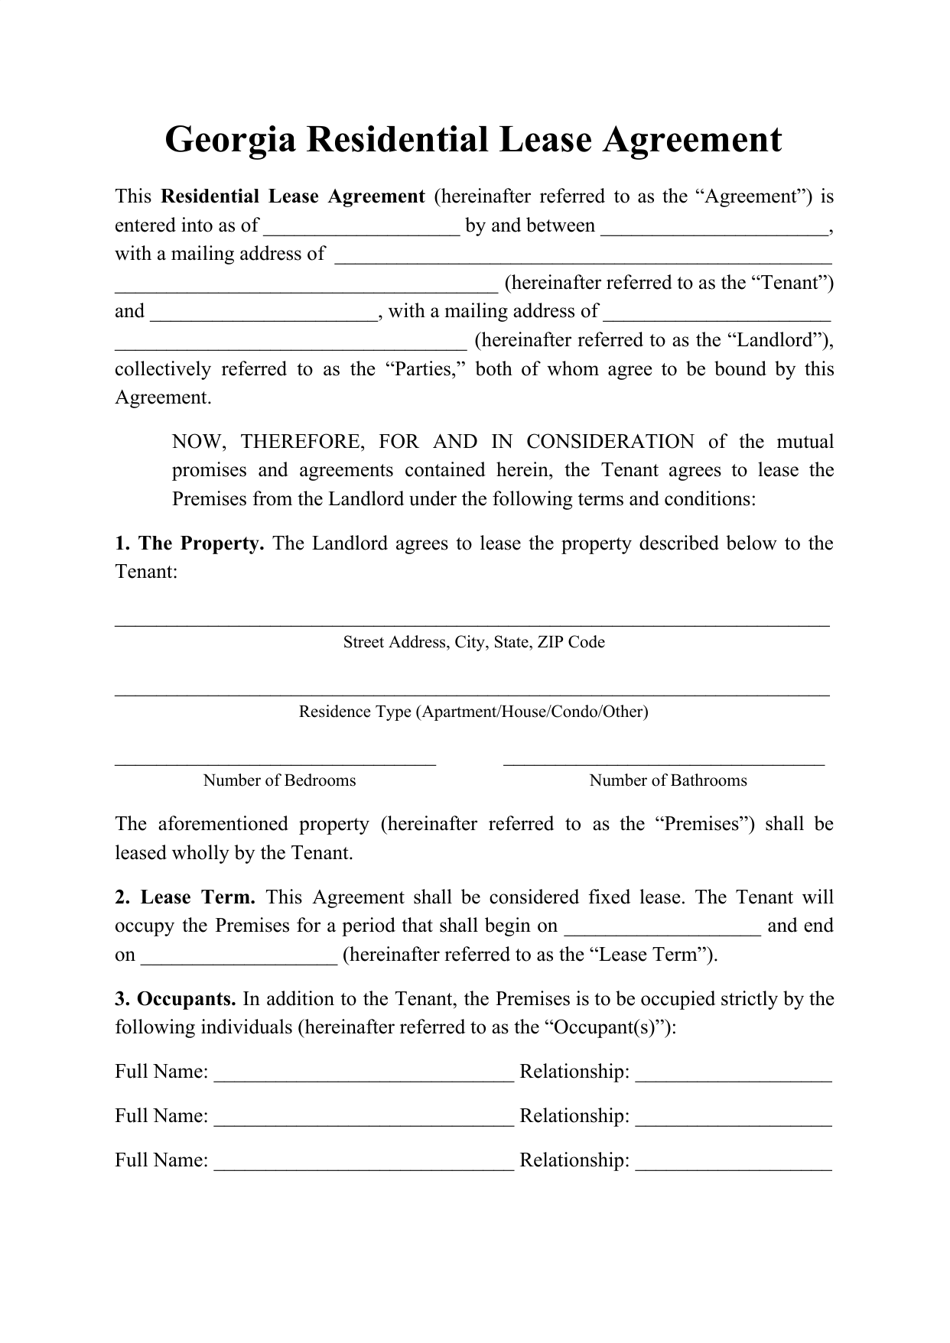 Residential Lease Agreement Template - Georgia (United States), Page 1